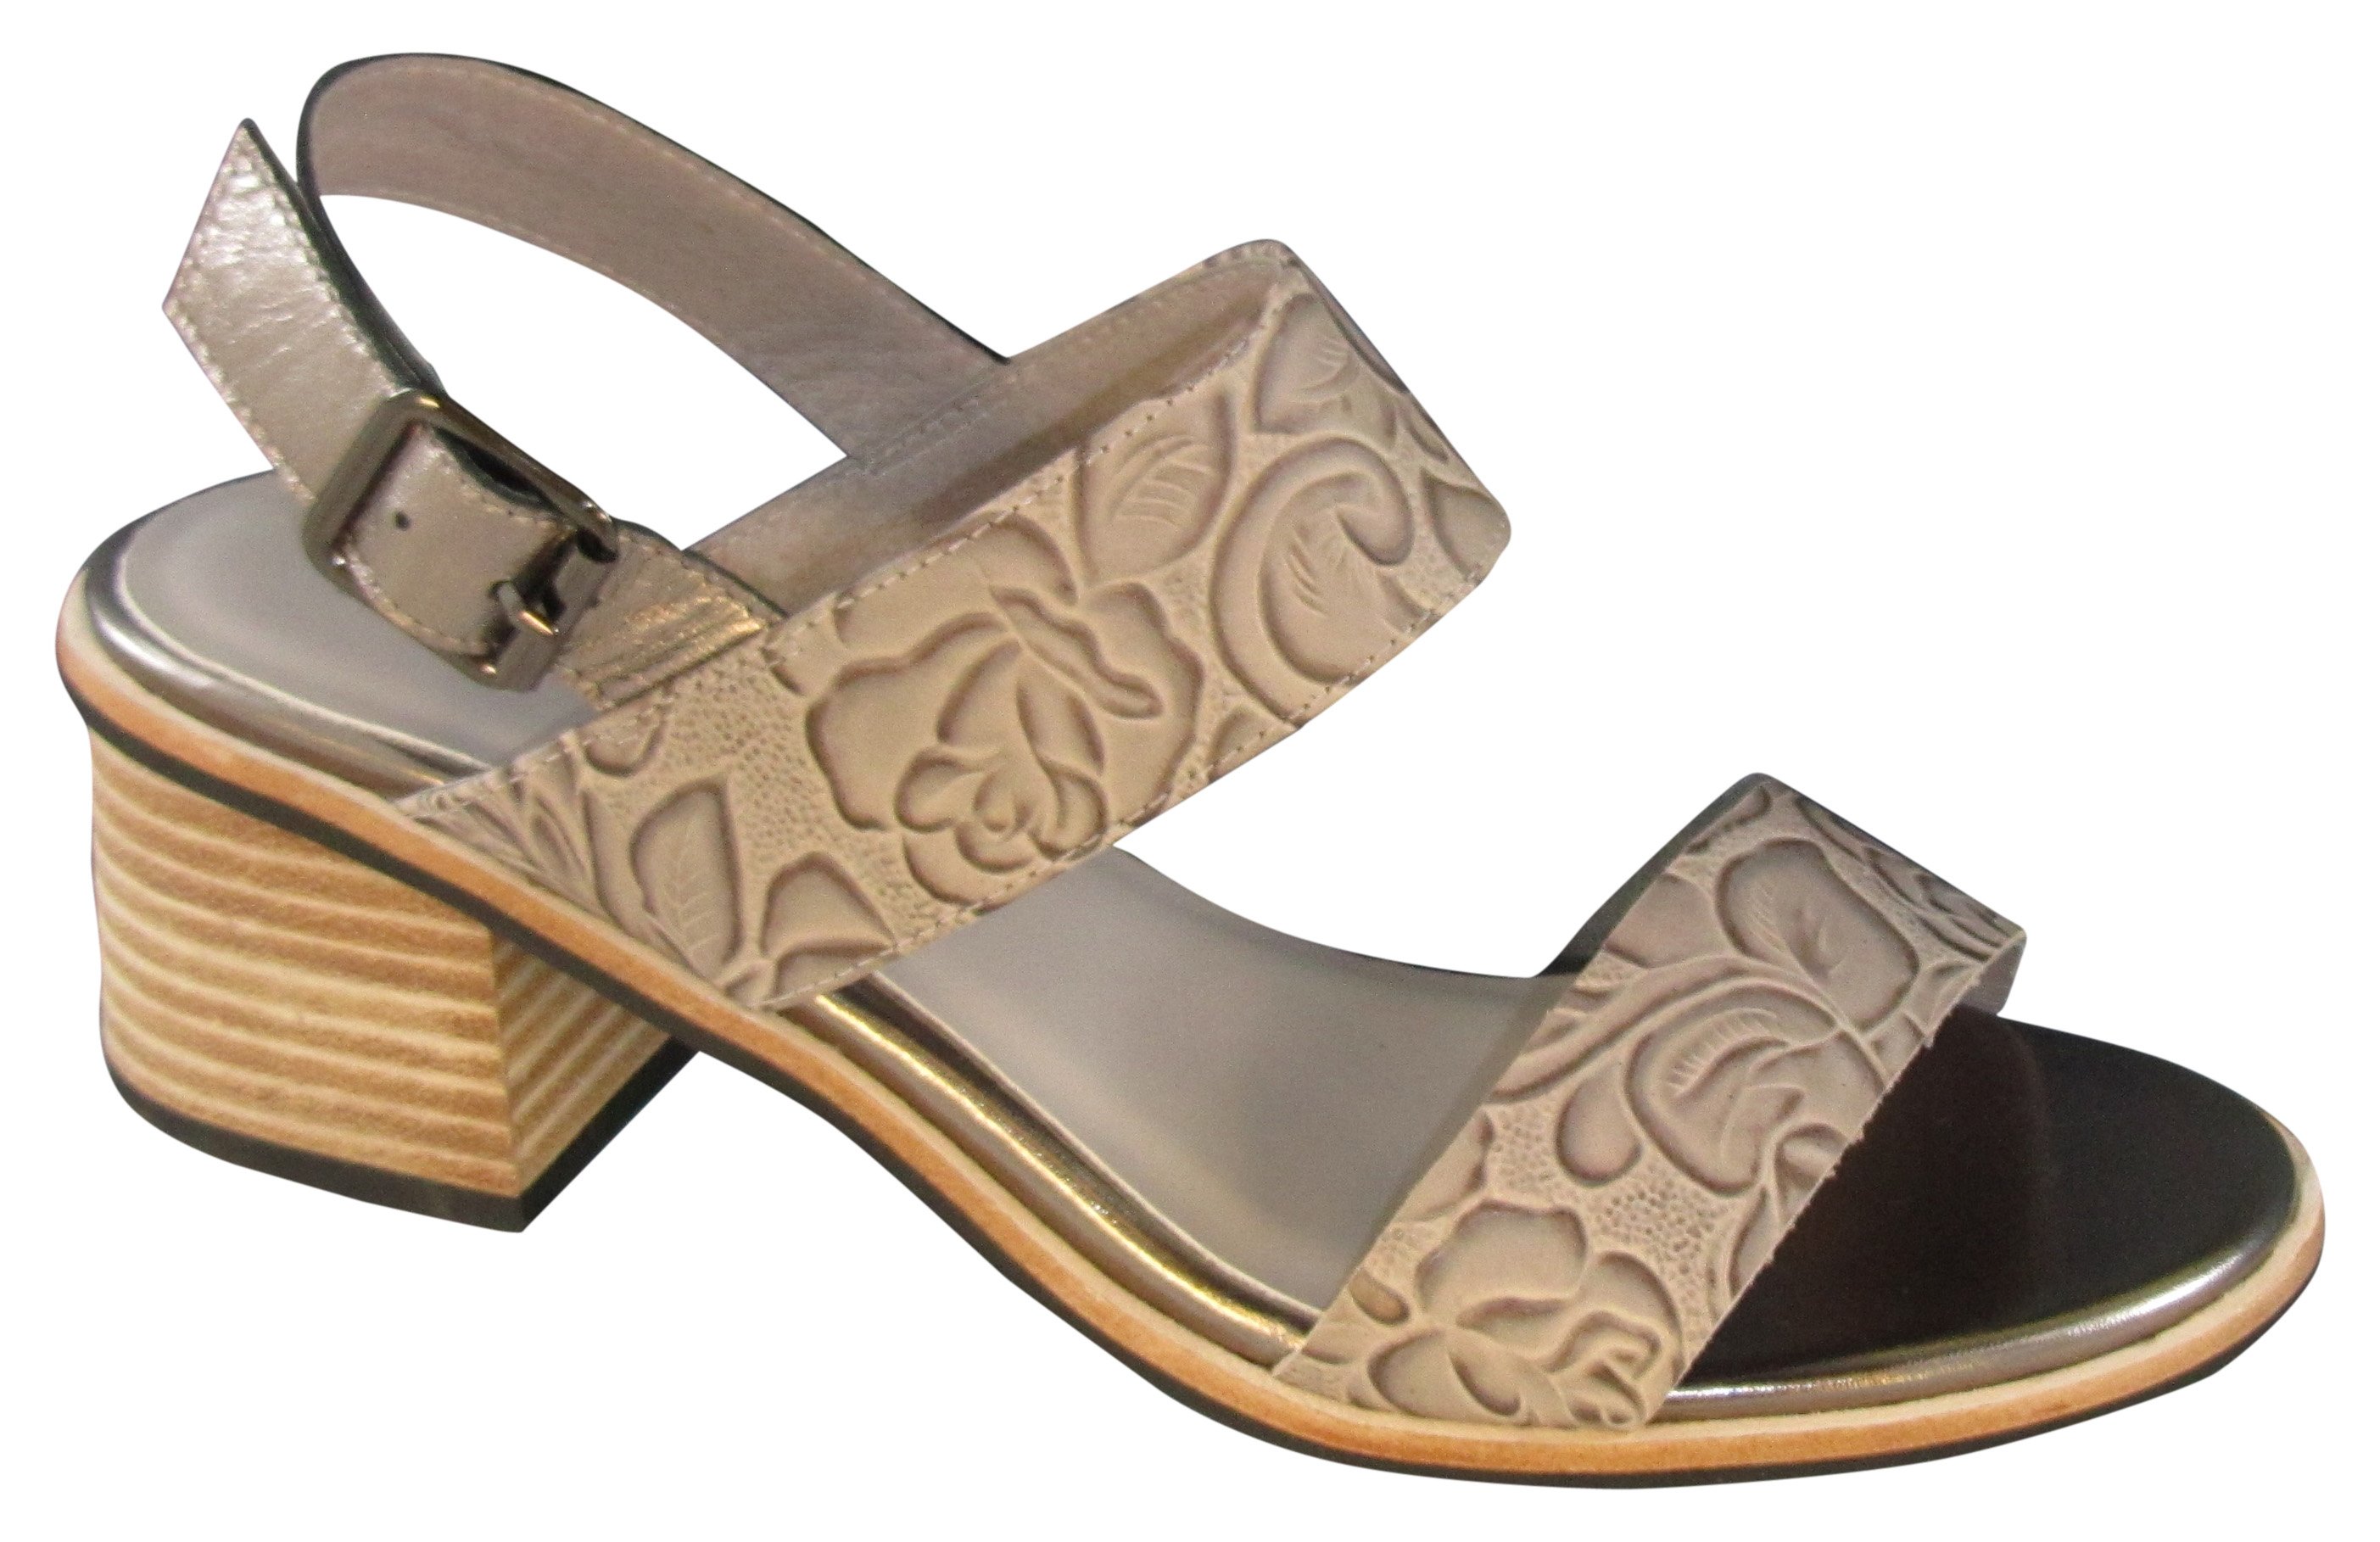 DEVOUT BRESLEY - WOMENS SHOES-SANDALS - low to flat : Shirley's Shoes ...